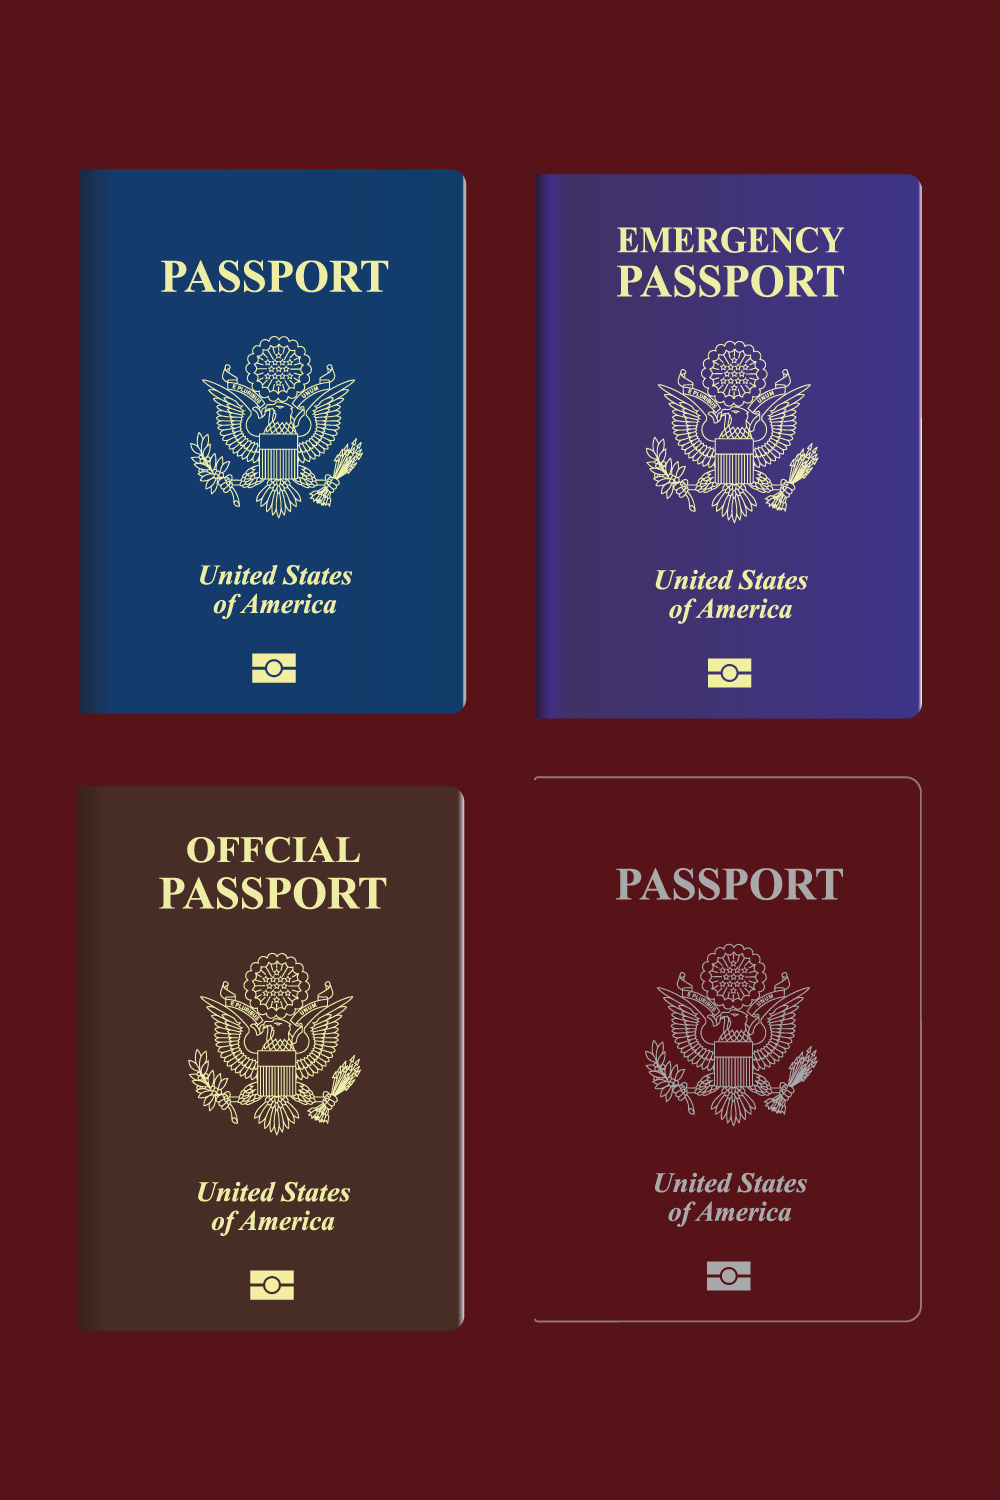 American Passport Outline SVG, US Passport Outline SVG, Passport Clipart,  Files For Cricut, Cut Files For Silhouette, Dxf, Png, Eps, Vector